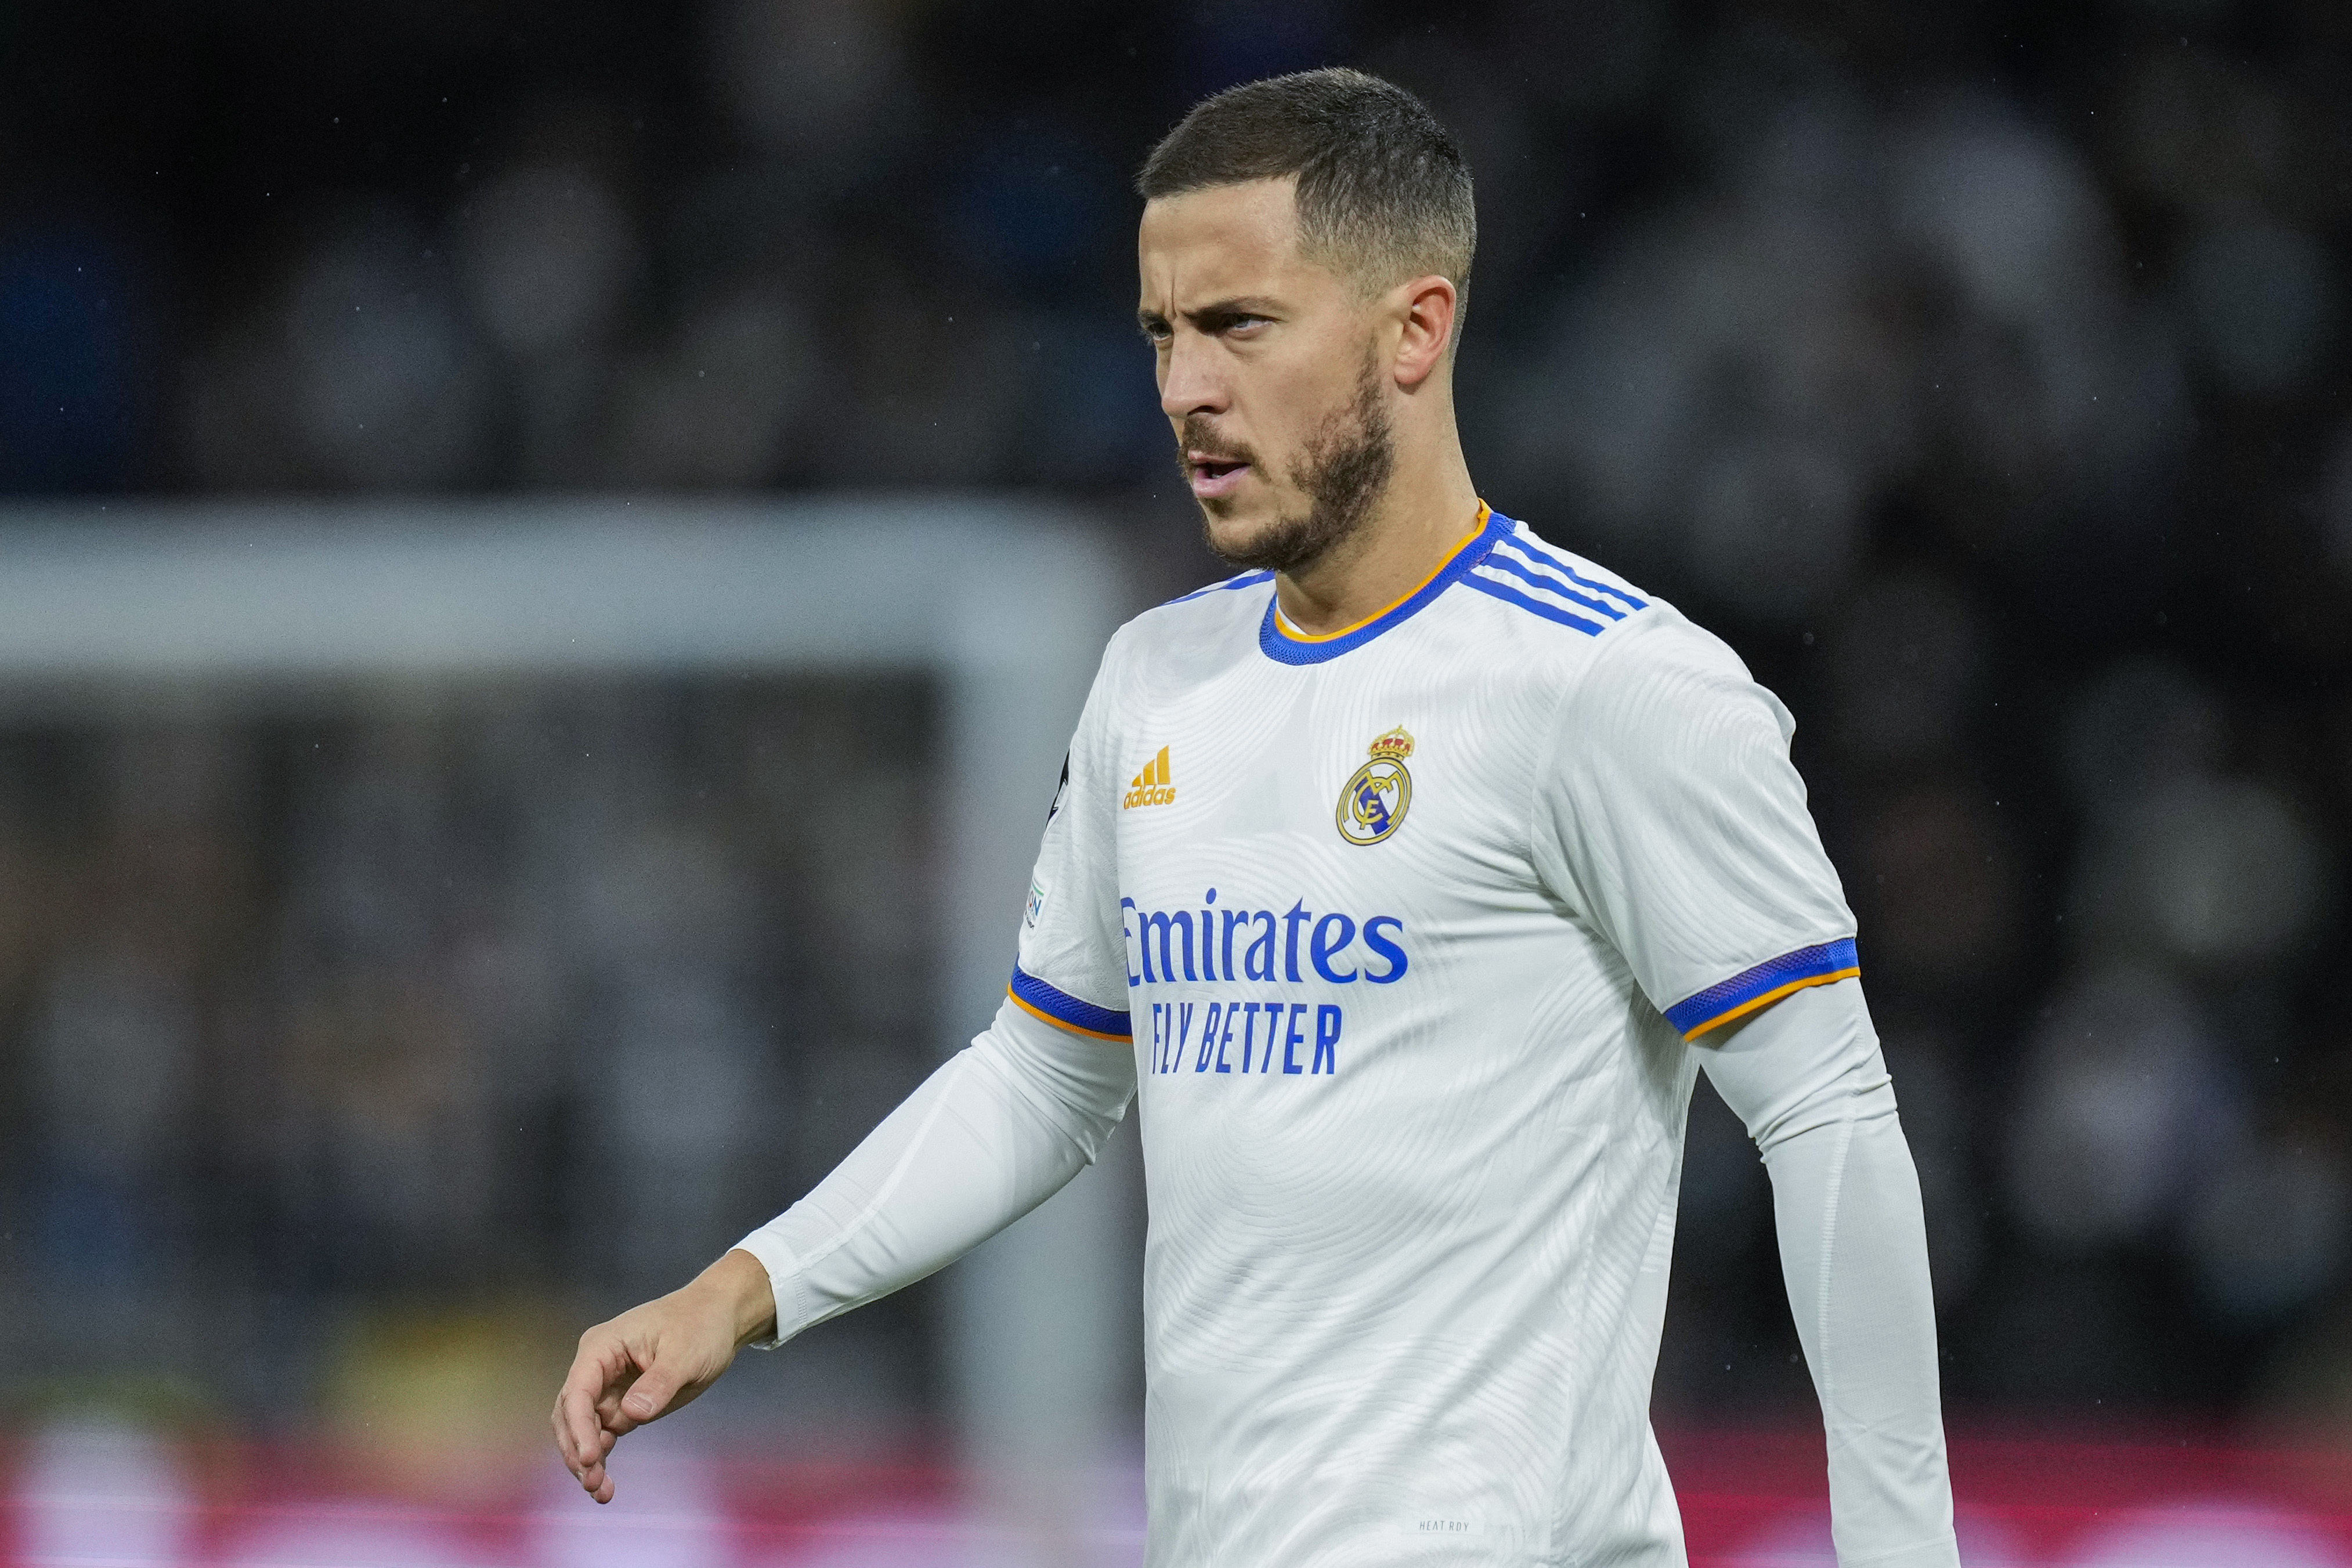 Real Madrid adamant on loaning out Eden Hazard before the 2022 World Cup in Qatar to give him more playing time